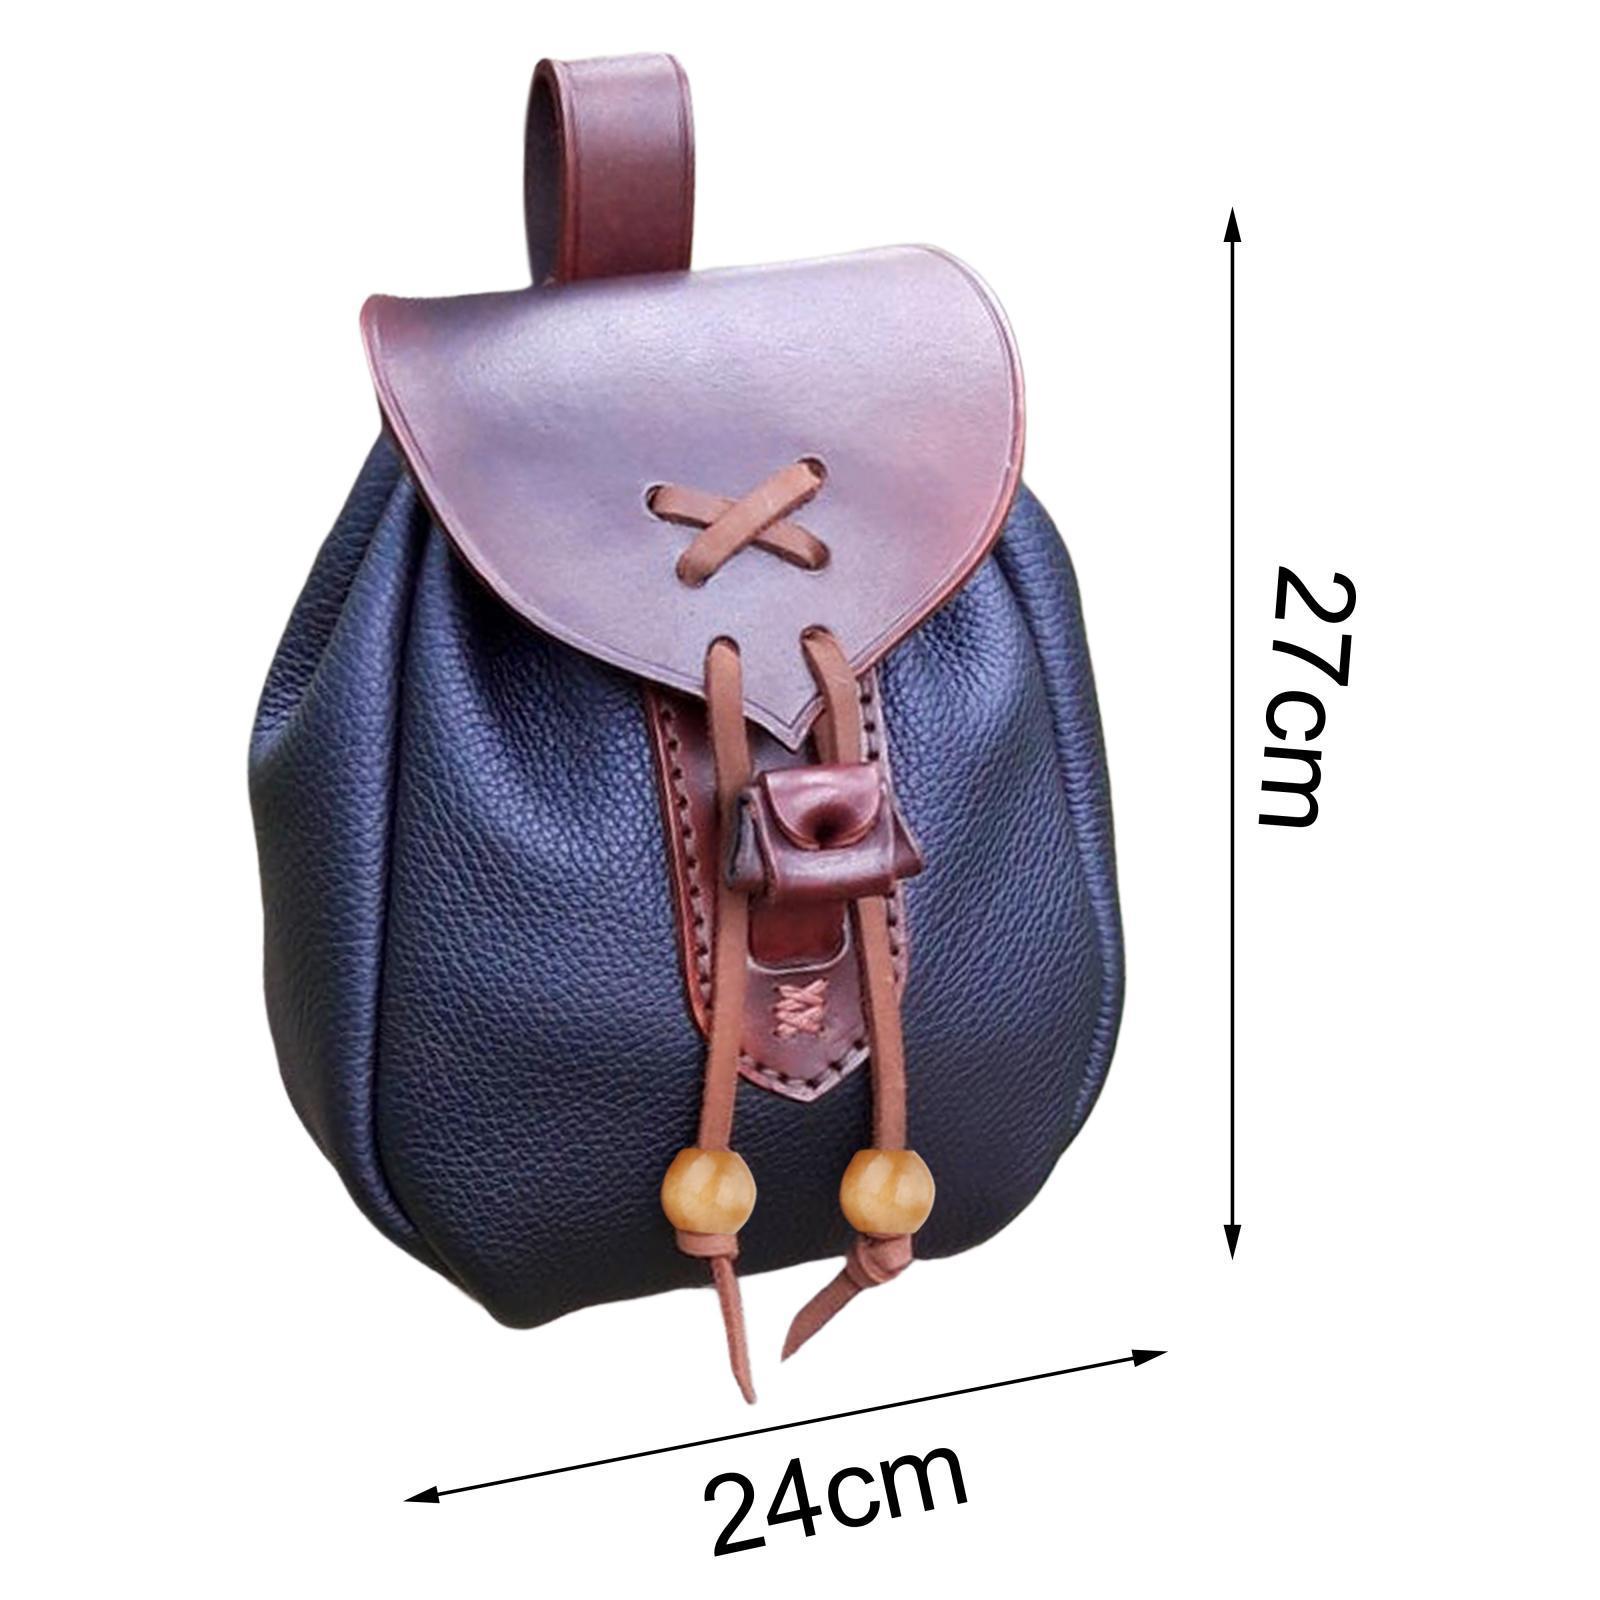 Retro Pouch Bag Style Backpack Pockets Cosplay Costume